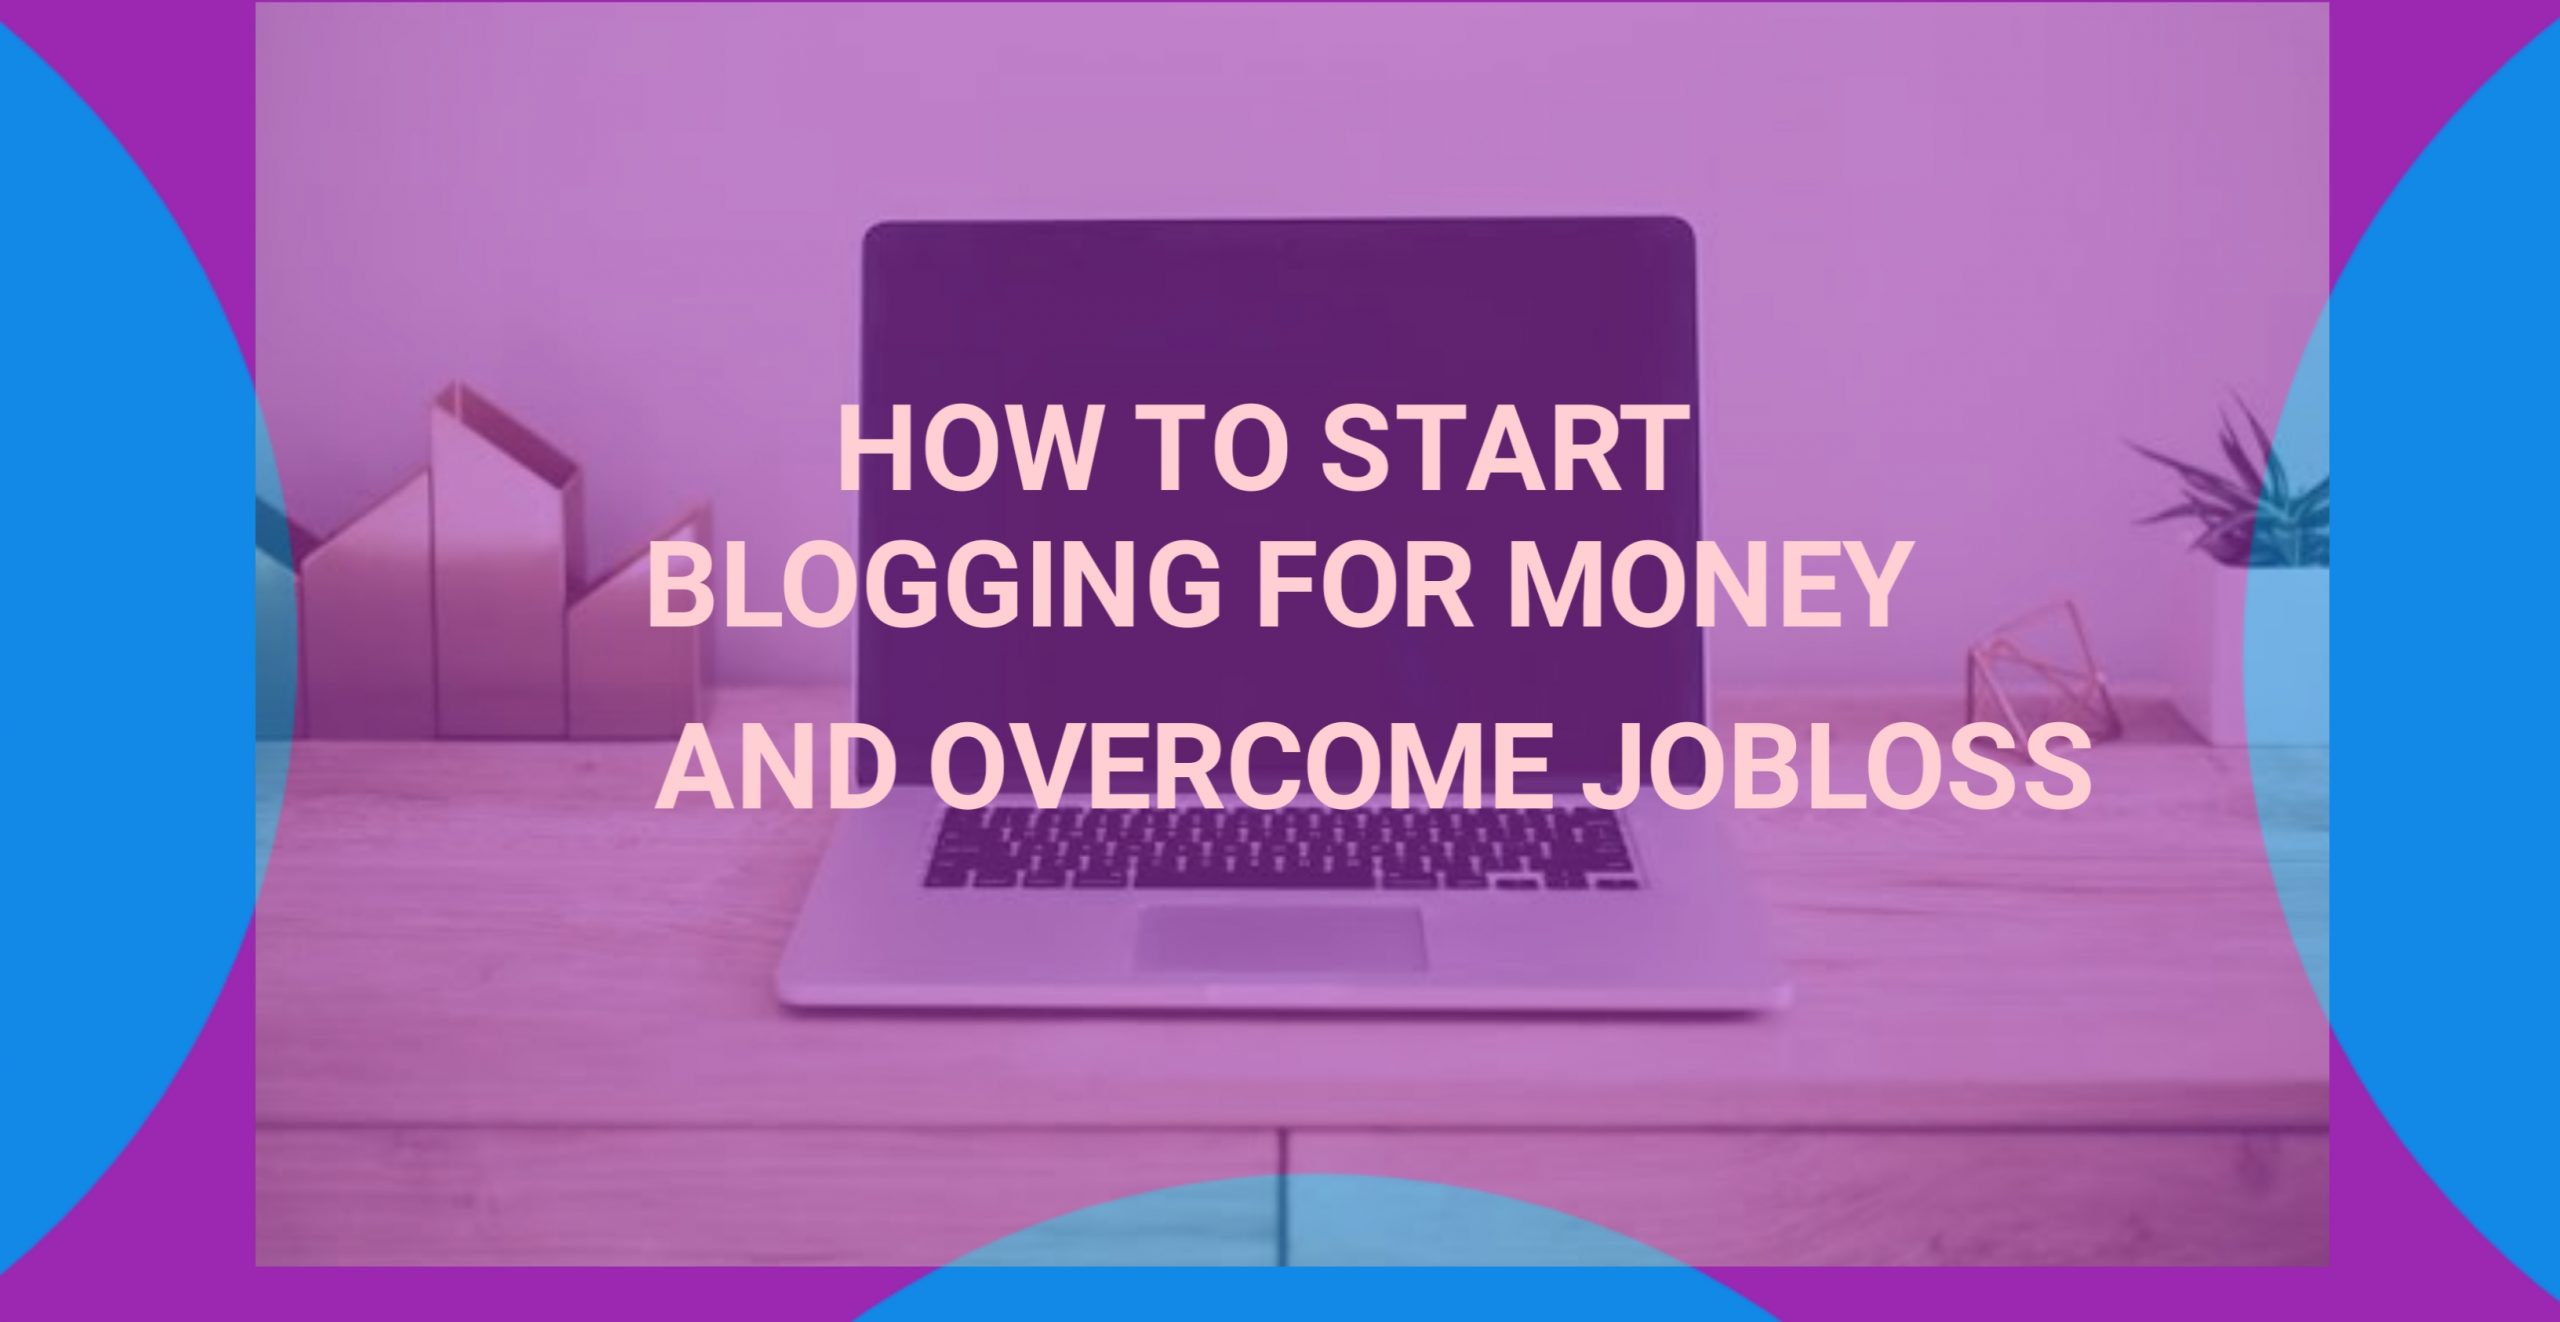 How To Start Blogging For Money And Overcome Job loss